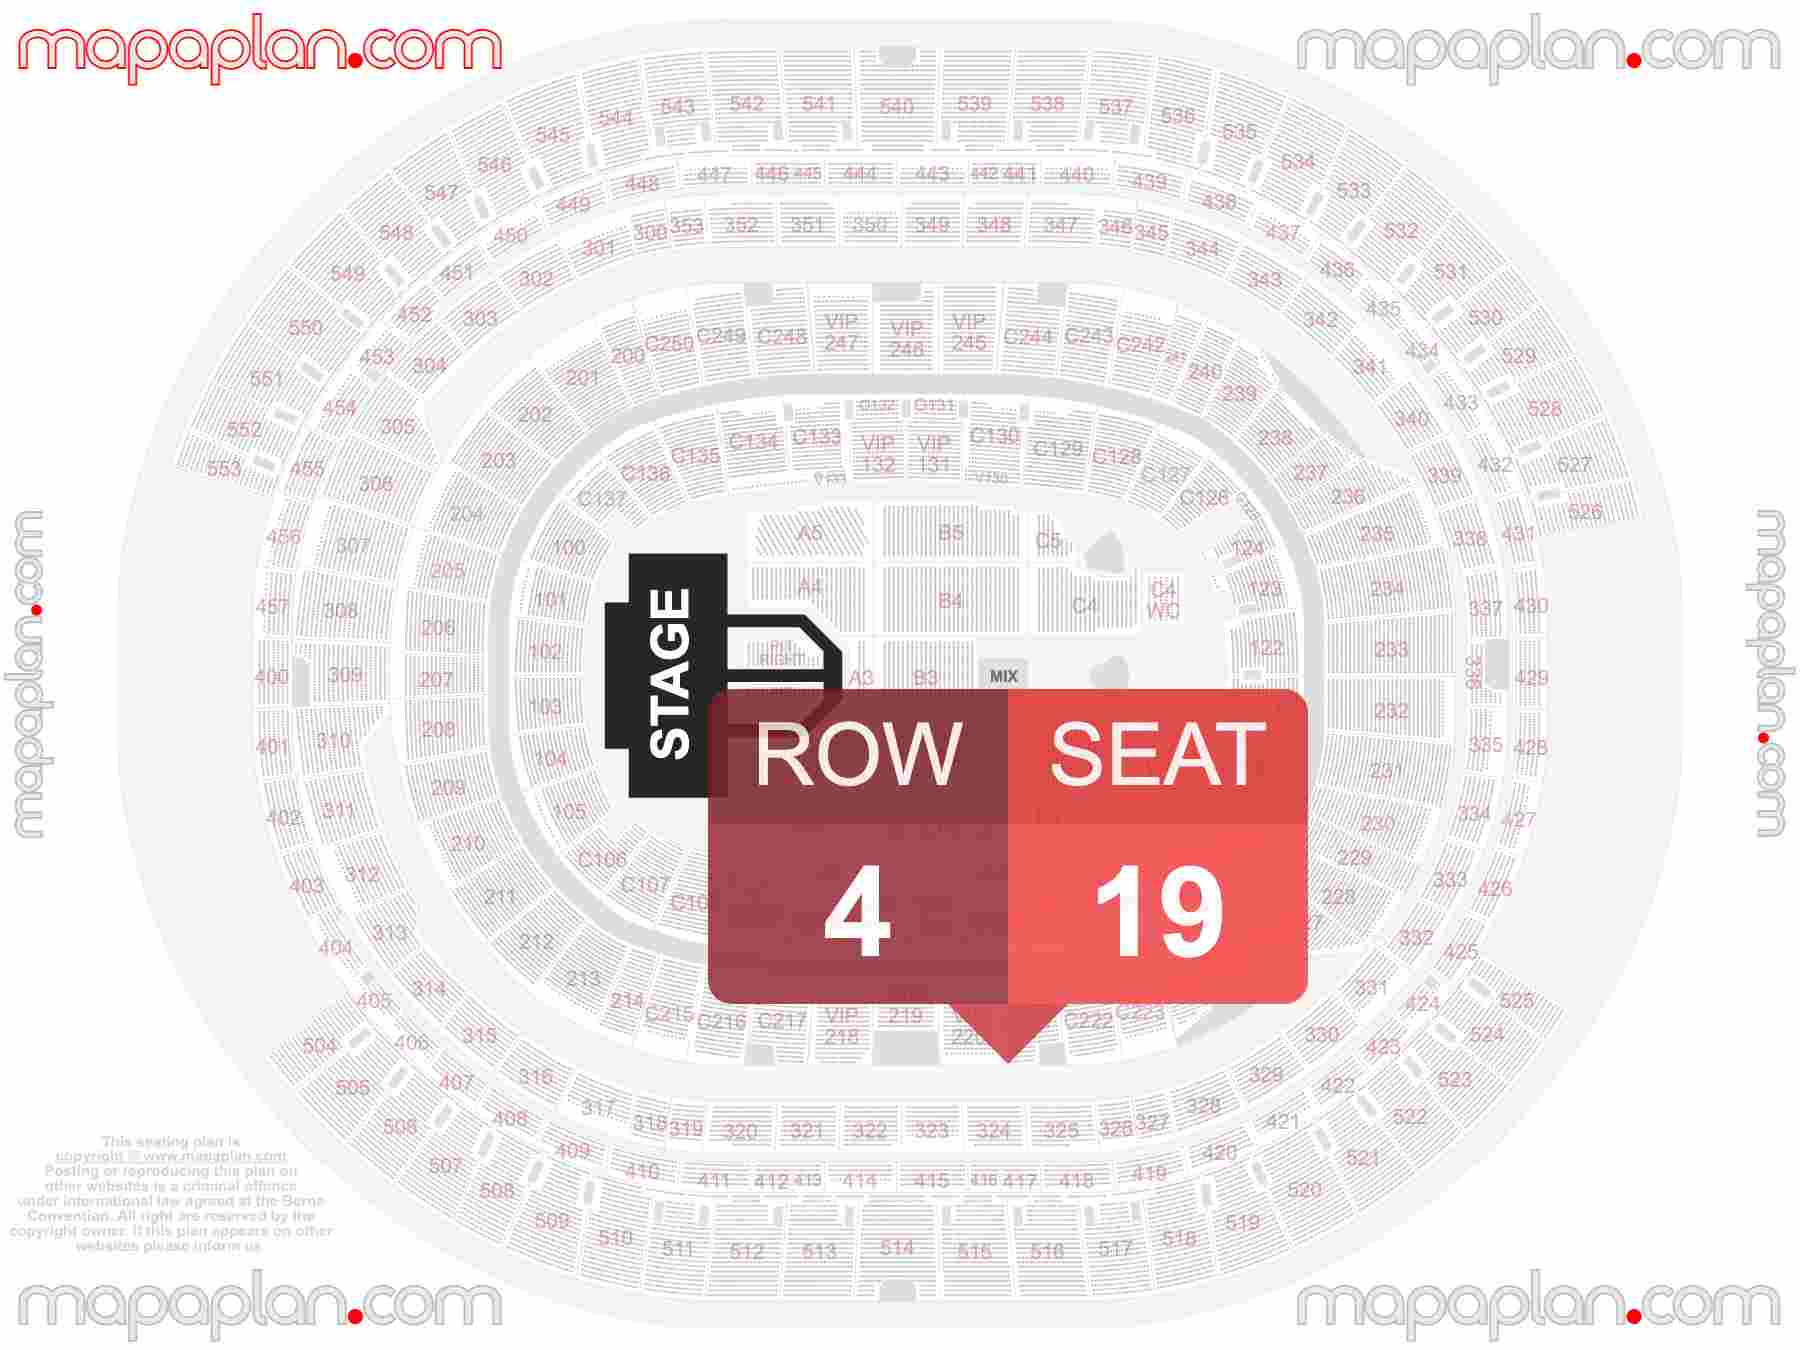 Los Angeles SoFi Stadium seating chart Concert detailed seat numbers and row numbering chart with interactive map plan layout